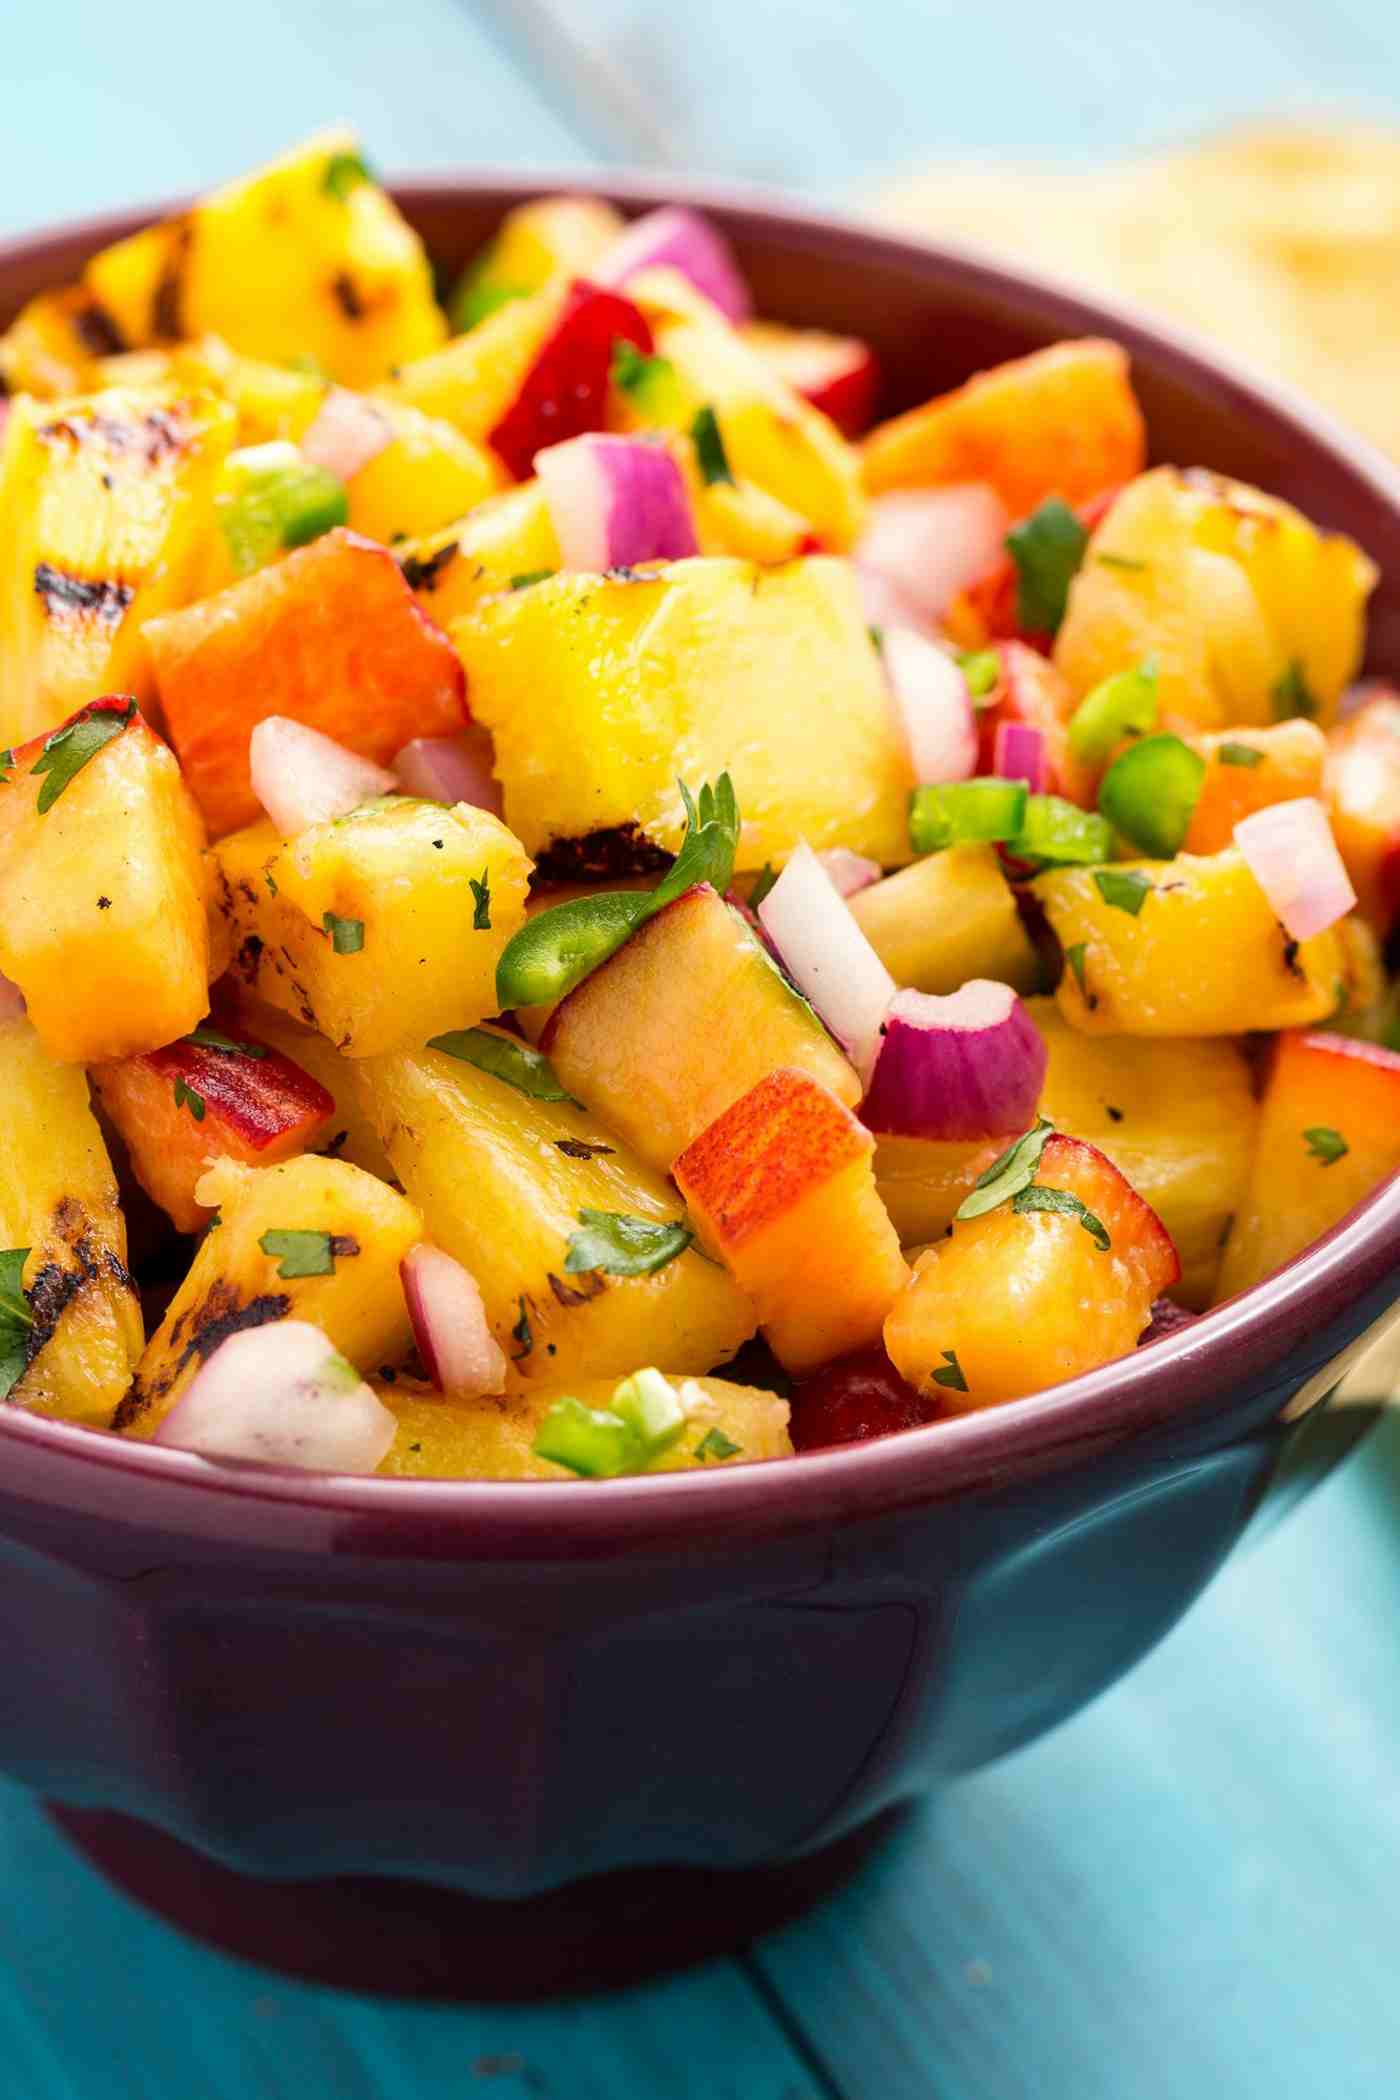 Pineapple, Jalapeno, Pfirsich and Zwiebel for a fruity-Mexican salad for the barbecue